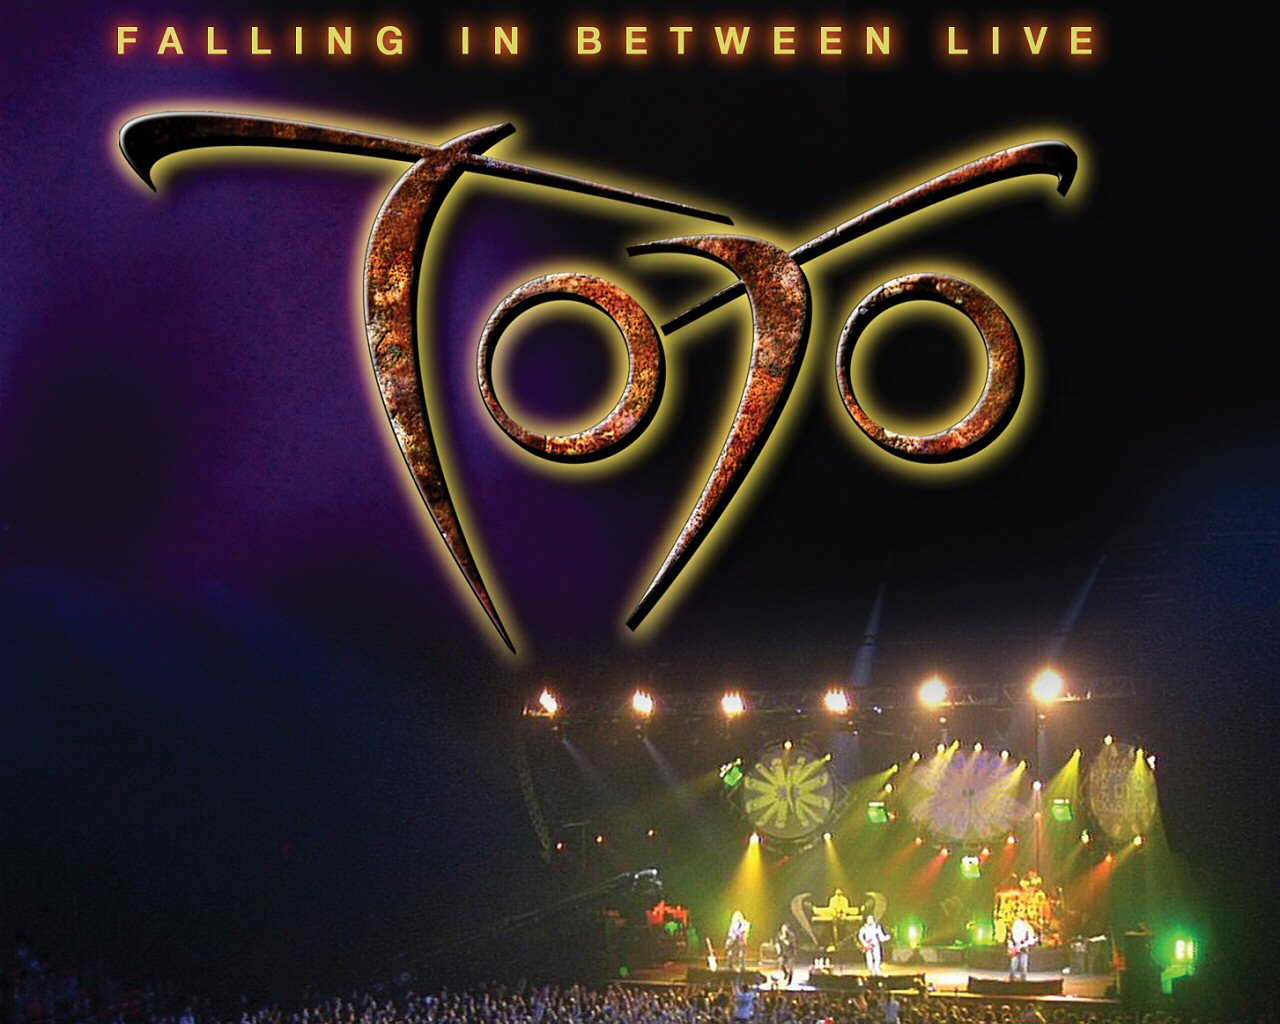 Download For Screen Resolution Or Higher - Toto Falling In Between Live , HD Wallpaper & Backgrounds